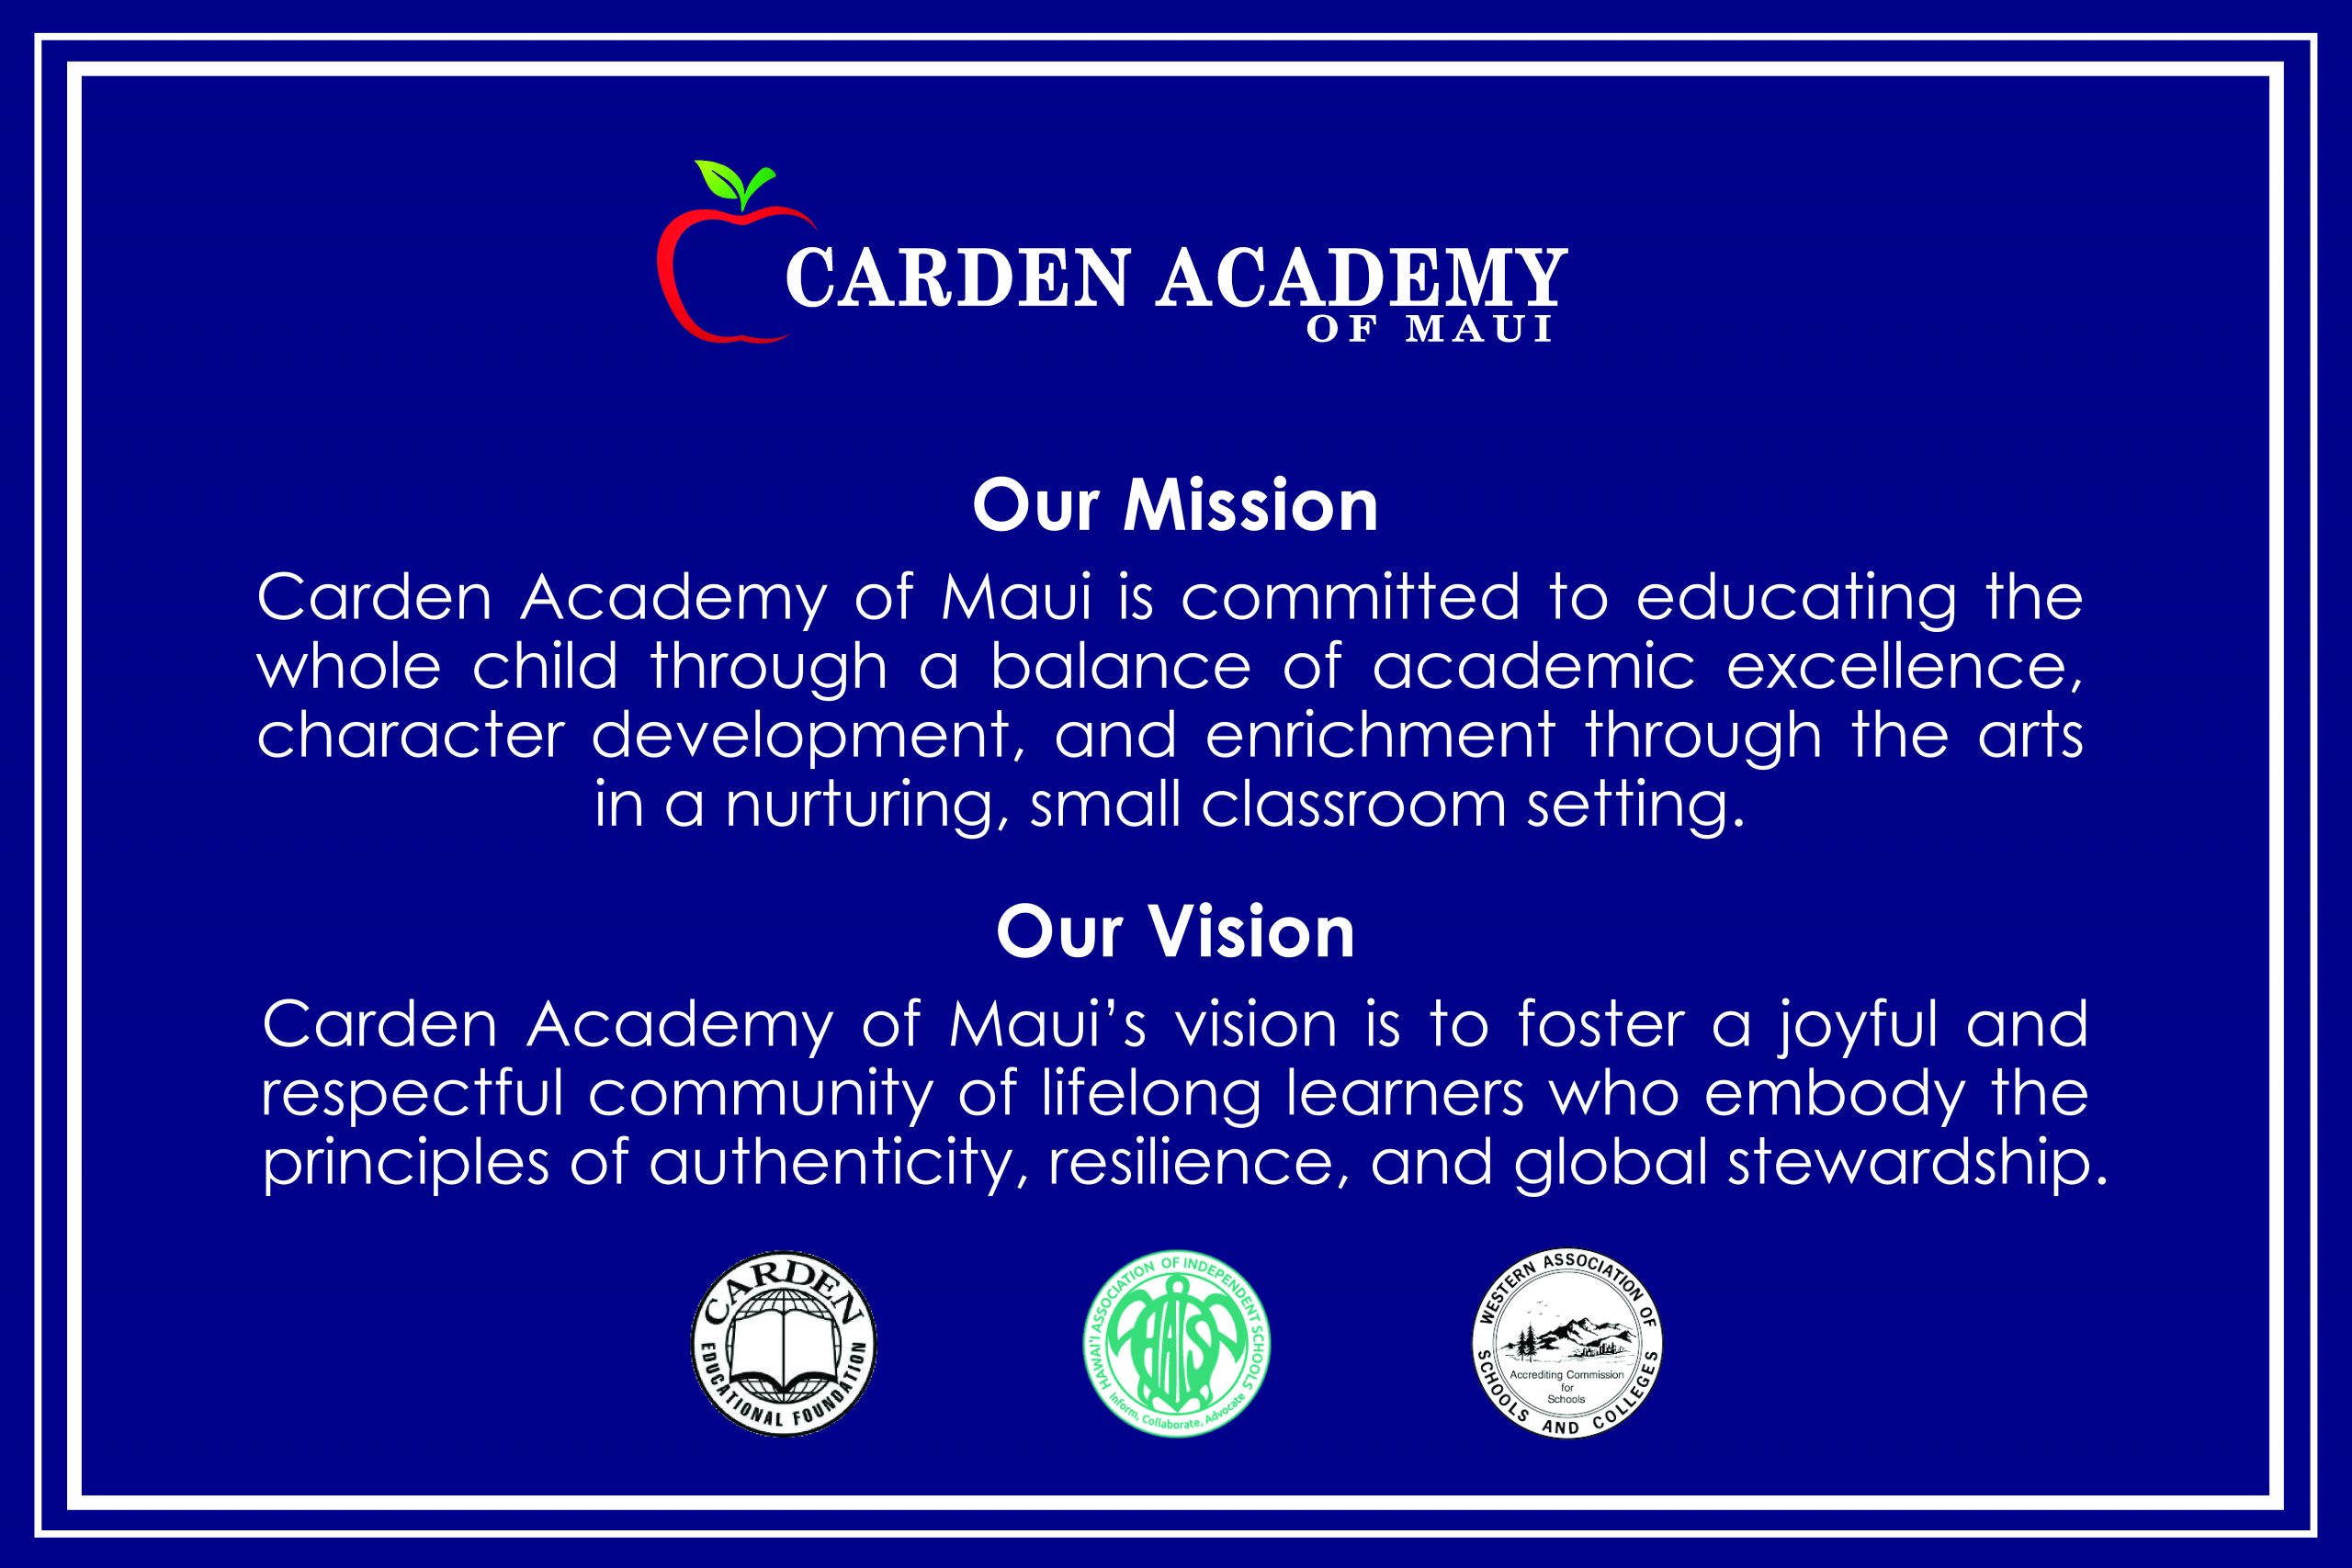 Mission Carden Academy Of Maui